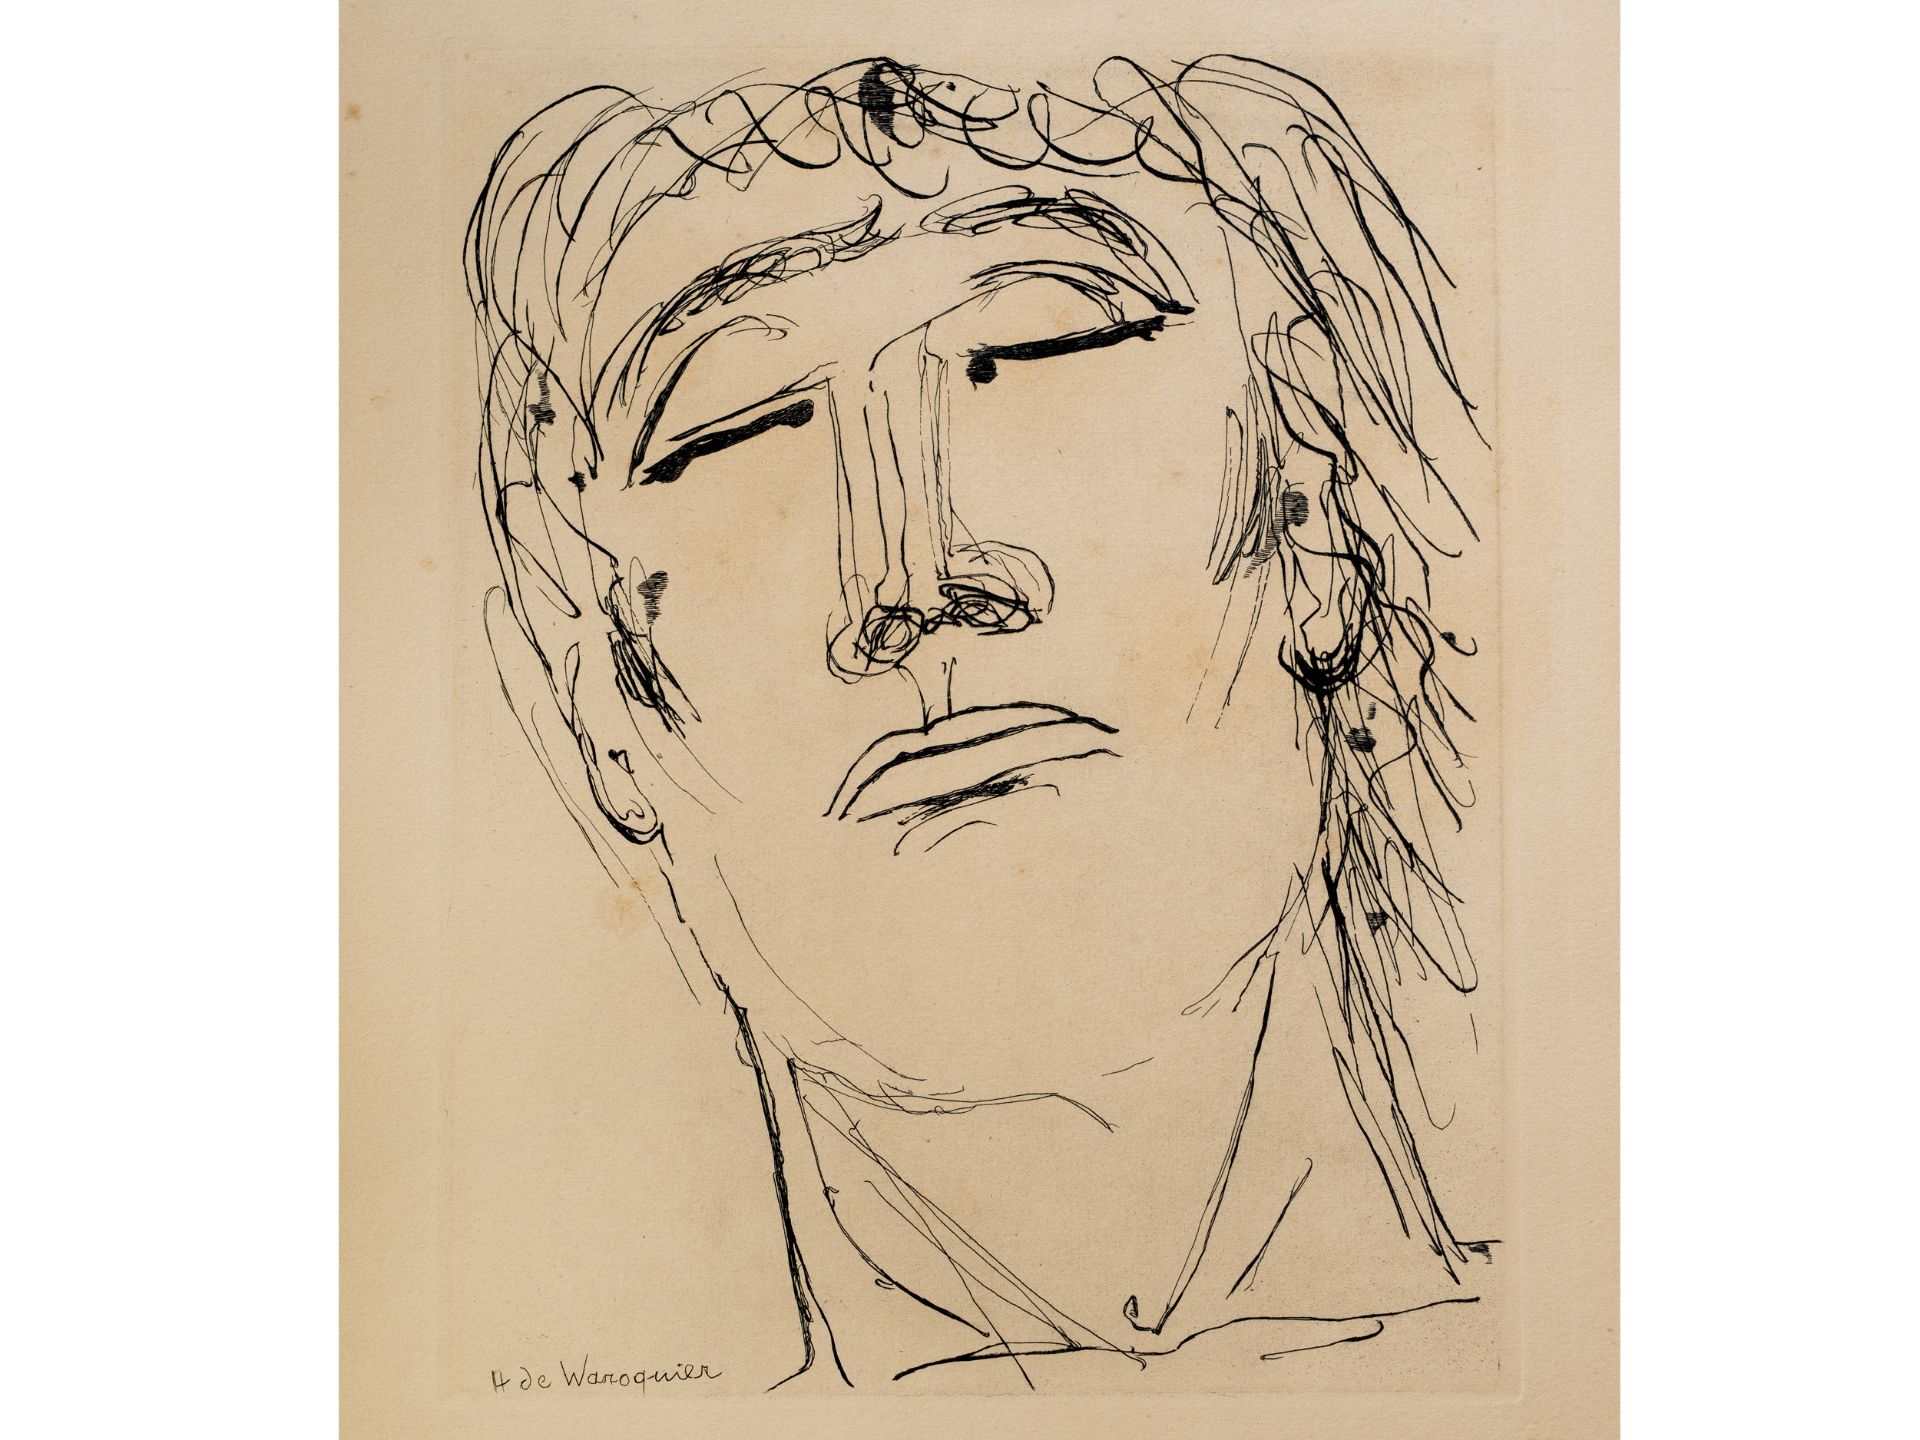 Henry de Waroquier, 1881 - 1970, Etching/Lithography - Image 2 of 5